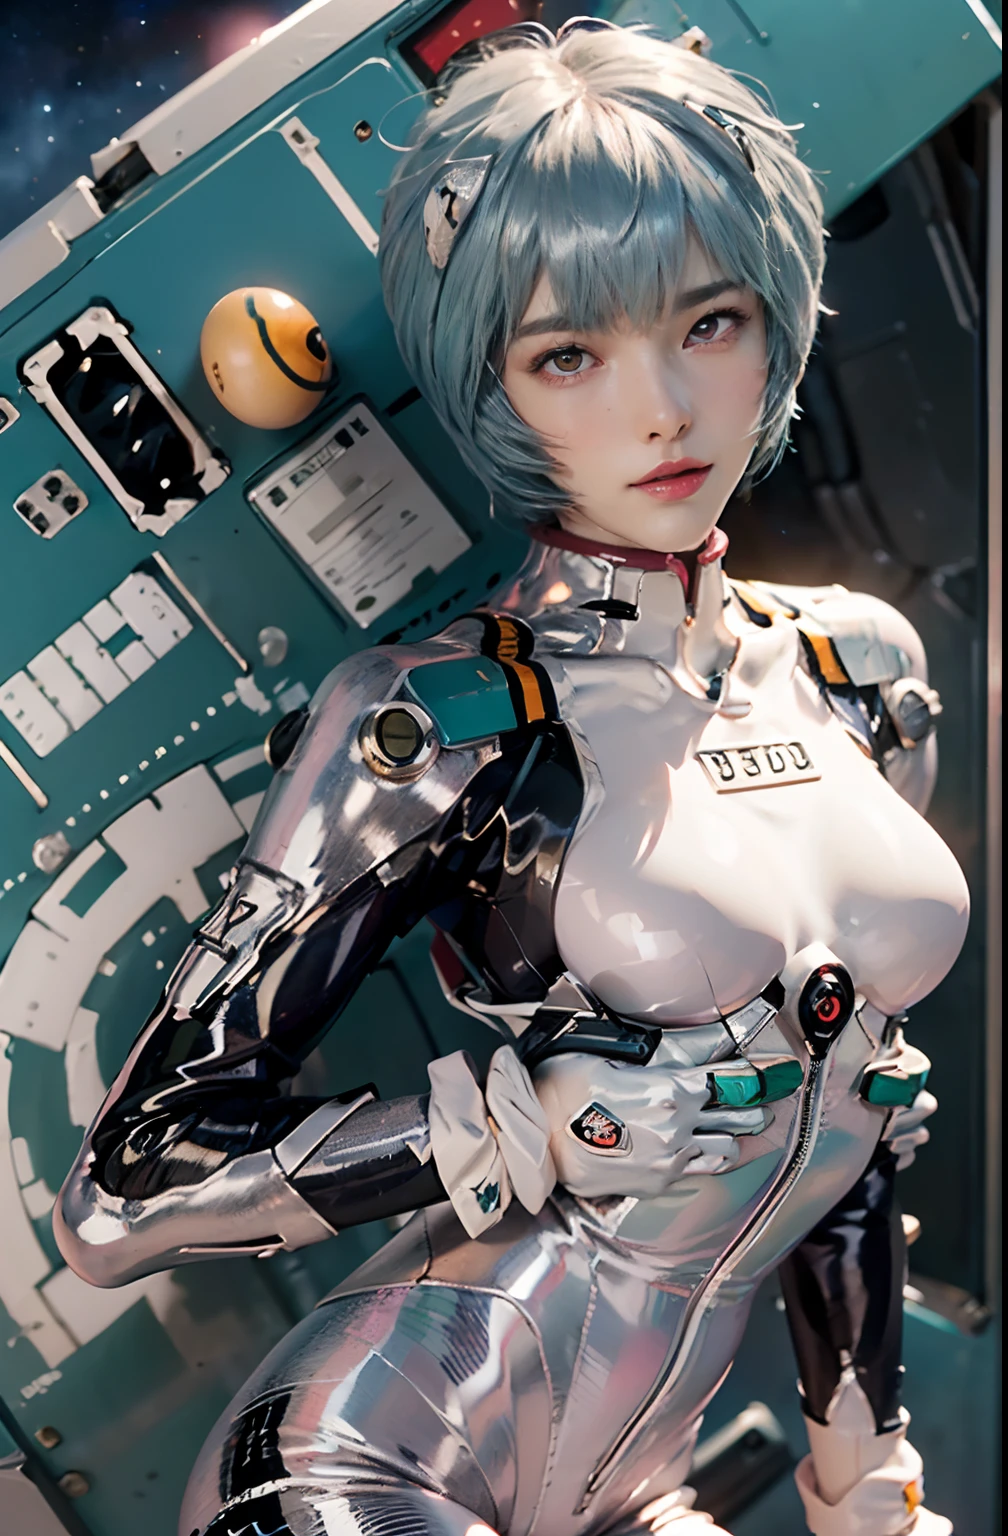 Masterpiece,NSFW,((Whole body:1.1))))), (Realistic),photore, Best quality, 1 female,(Tall)),ear cover,(((Rei Ayanami, Plug set 00)))), ((((Red eyes,Beautiful face, Beautiful eyes))), (Cute face)), Moist eyes, face,Detal Face, Detail lips, Detail eyes, (Long eyelashes), Double eyelids, (Seductive smile), ( (Gentle eyes, Fleeting expressions)),(Rubber set with intense metallic luster and smooth surface), (((((Sexy skinny metallic gloss rubber set)))), (Thick black line)))), From the bottom, (Upright), (Carmelte), (Smooth body lines)), Light short hair, (((Pale thin eyebrows)), Beautiful hair, (Large round chest), The small logo pattern on the chest is zero, Mecha suit, Elongated waist, White skin, (Turning Pose), ((Night sky, Spaceship)), (Face and eye details: 1.1), feeling of solitude, Blush, (Shy)), Very delicate and beautiful girl, The small logo pattern on the chest is zero, standing, (((Leg closed position)), (TO8 contrast style), Small egg-shaped psychosensory devices on the sides of the head